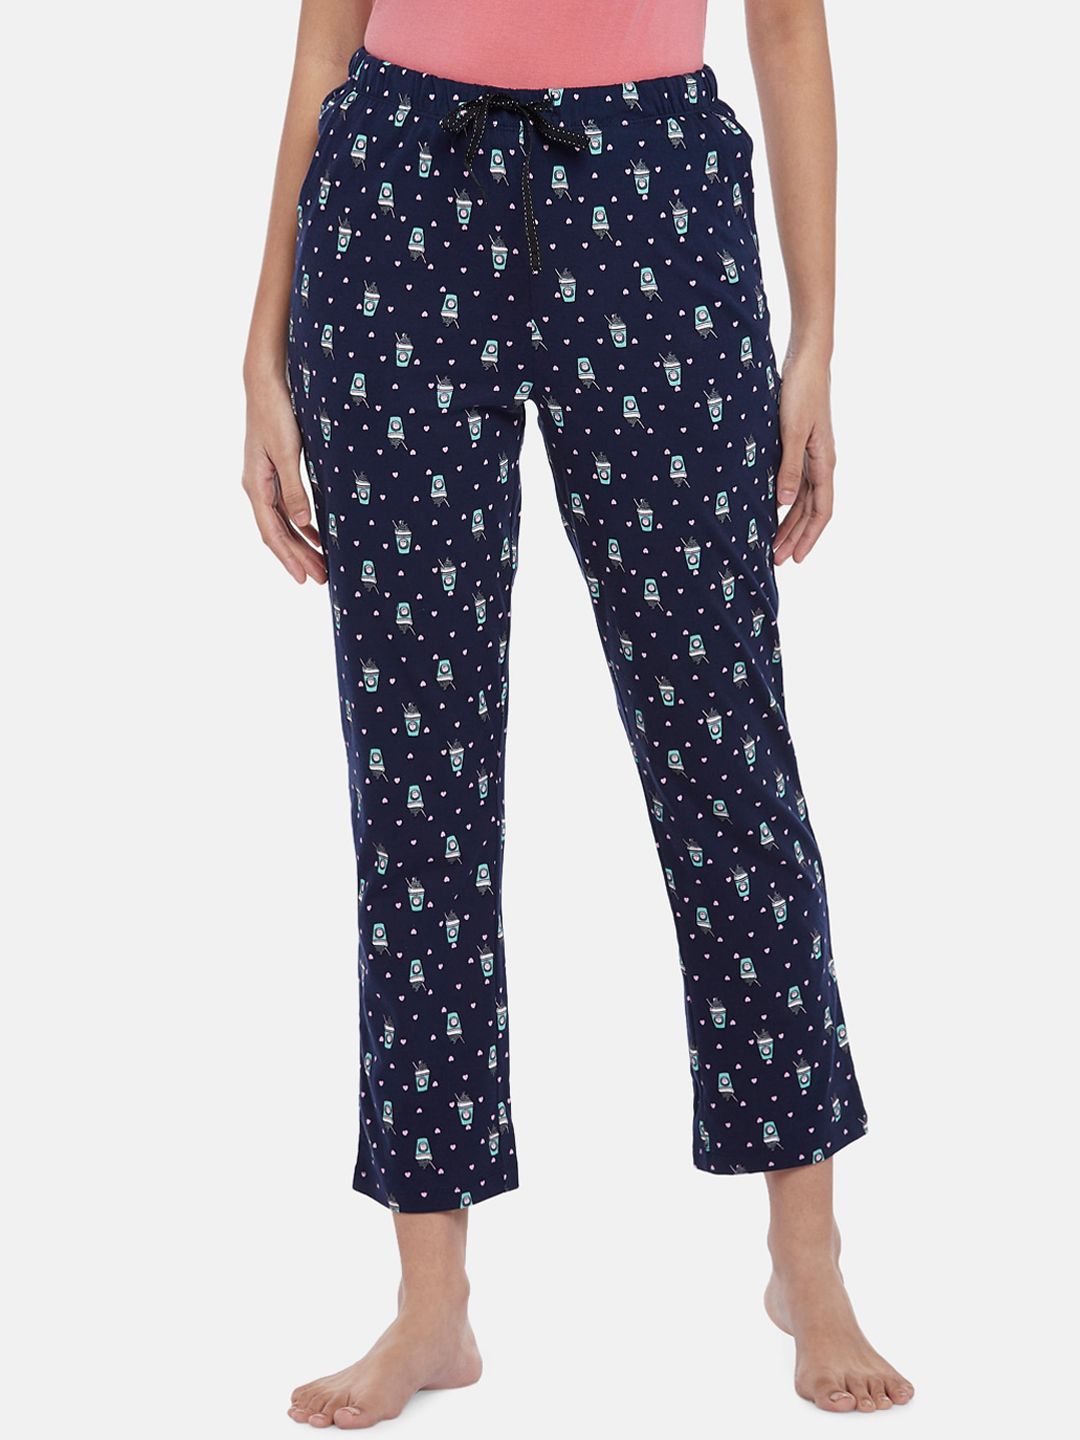 Dreamz by Pantaloons Women Navy Blue Cotton Printed Lounge Pants Price in India